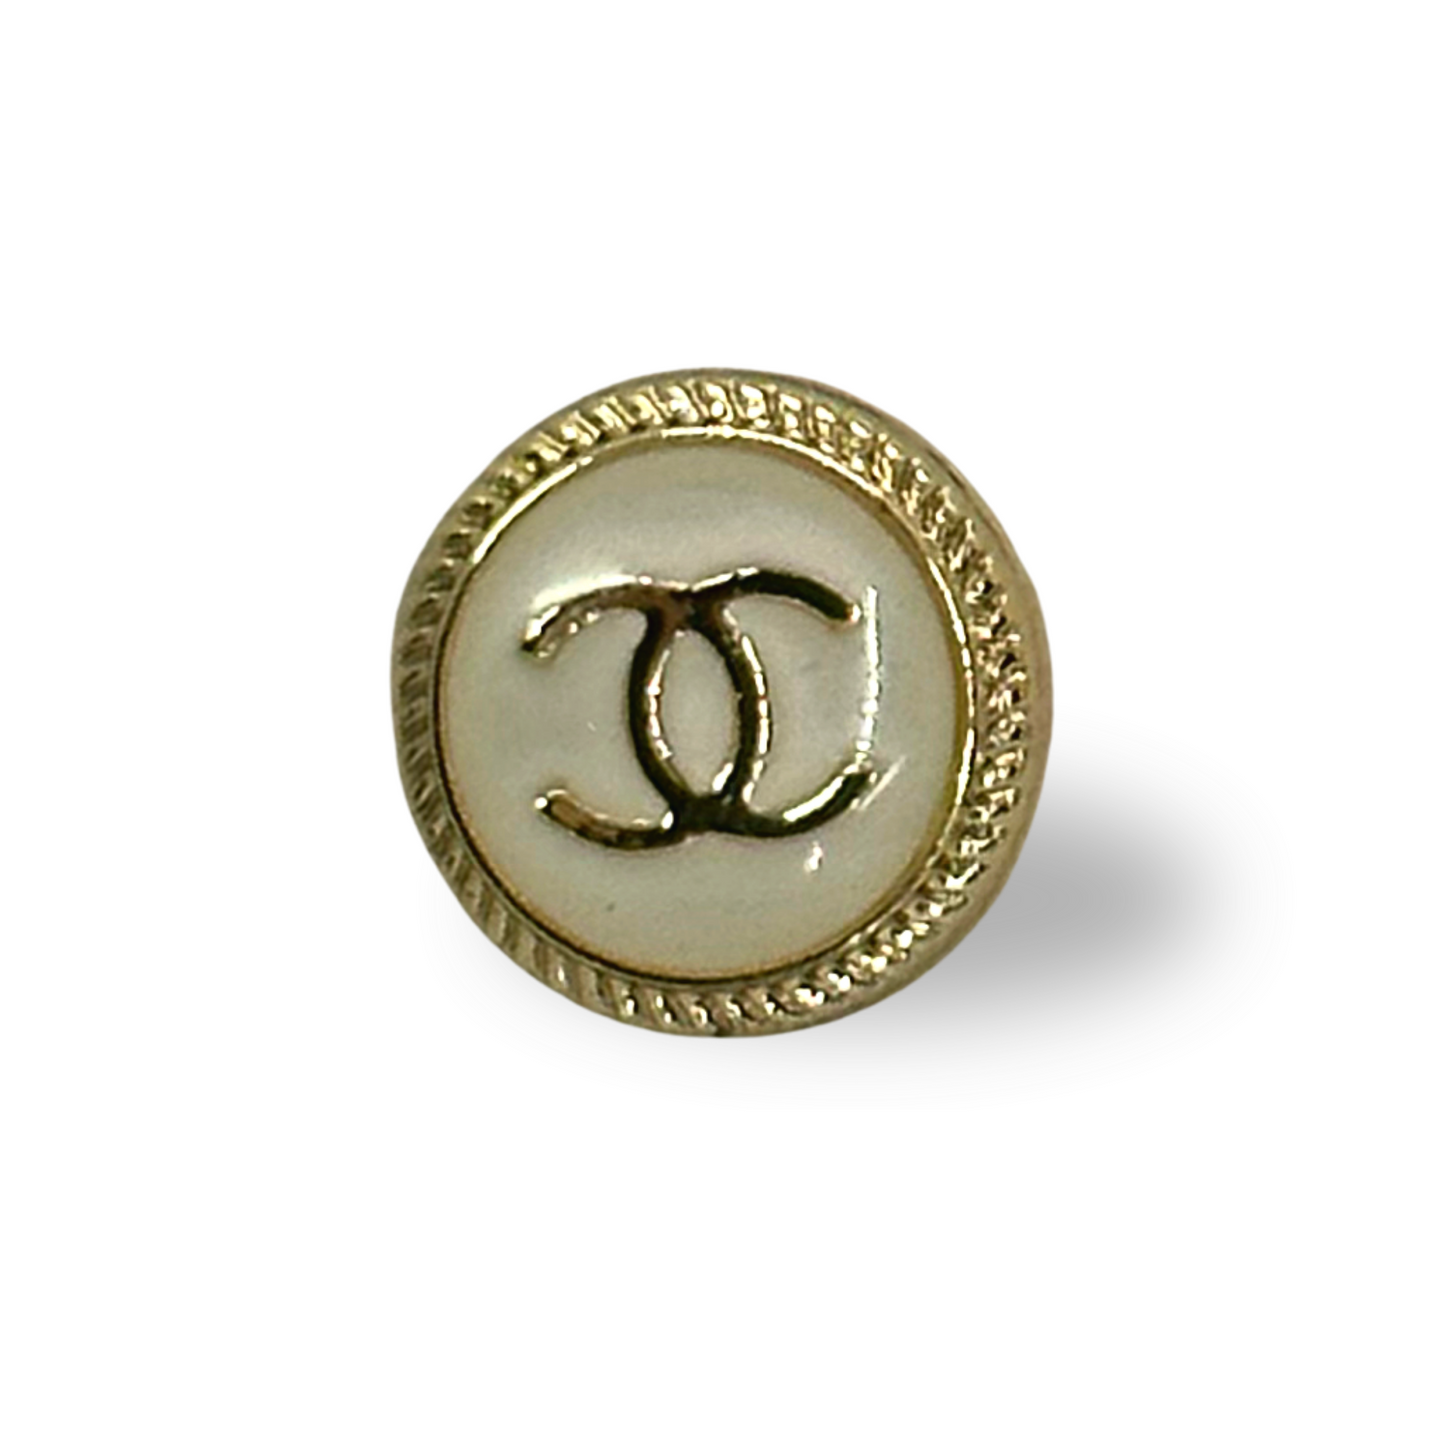 Authentic Chanel Button | Reworked Gold Earring Set